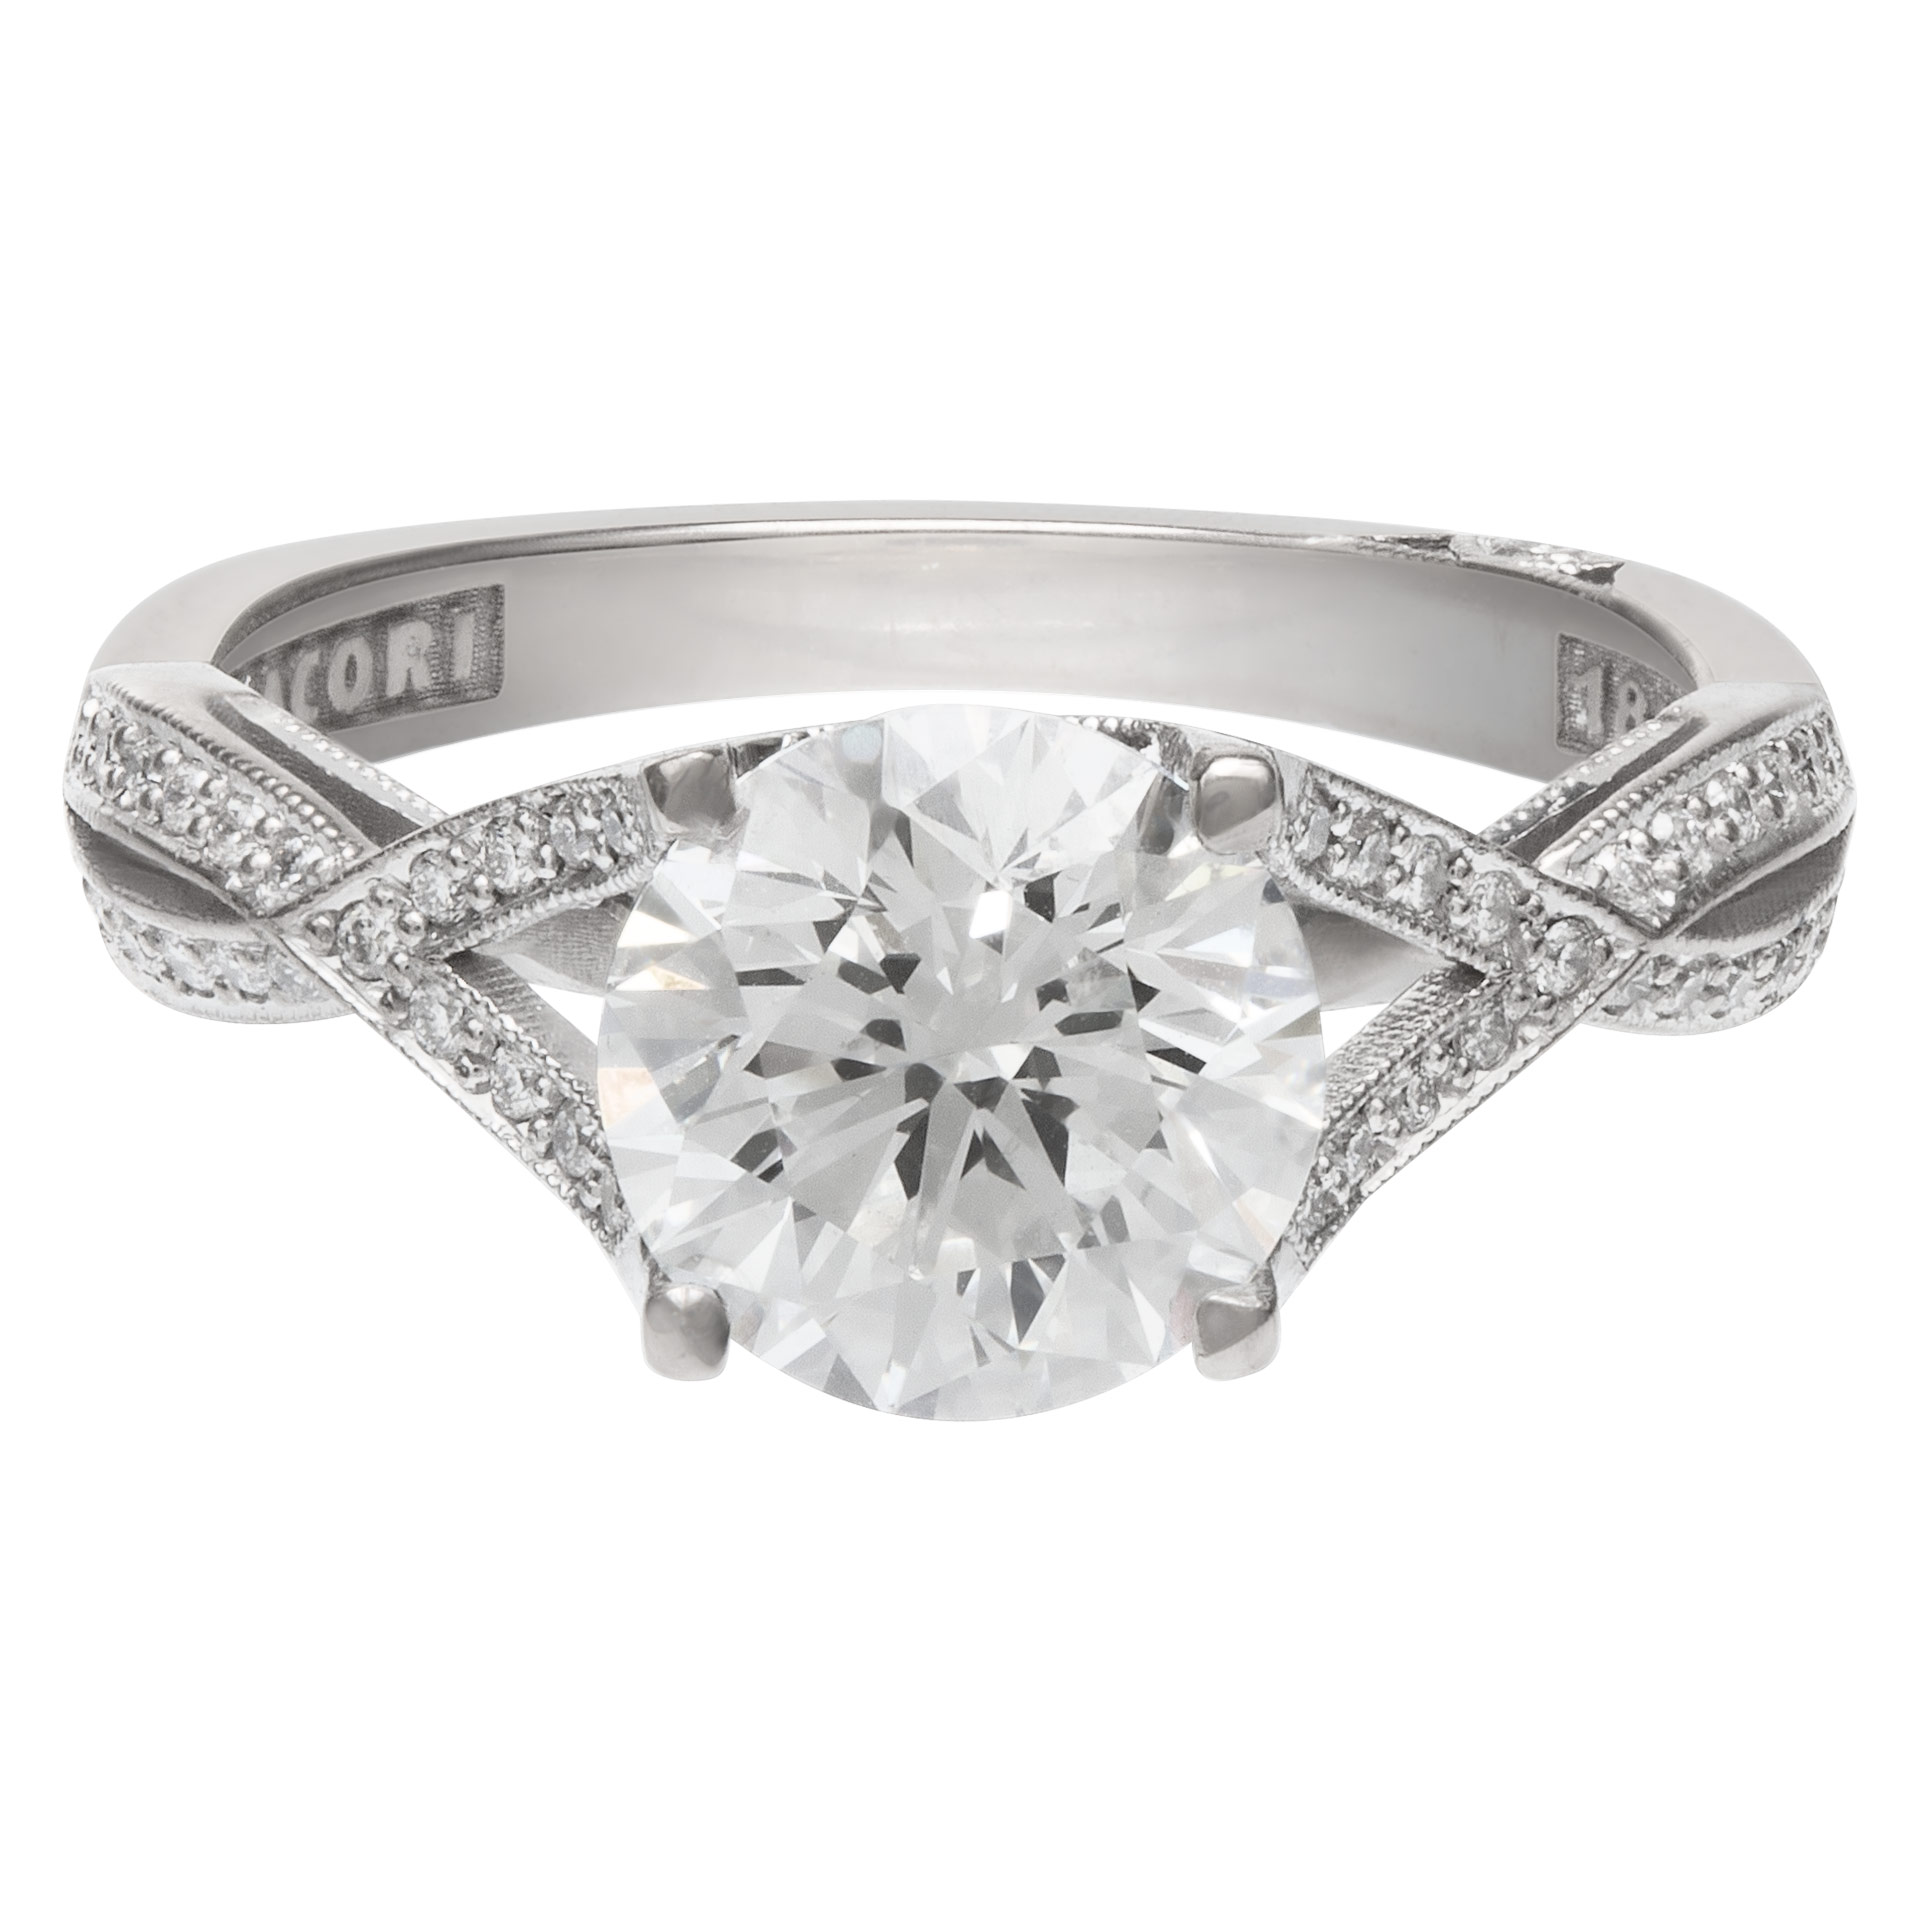 GIA certified diamond 2.01 carats (H color, VS2 clarity) ring set in 18k white gold.